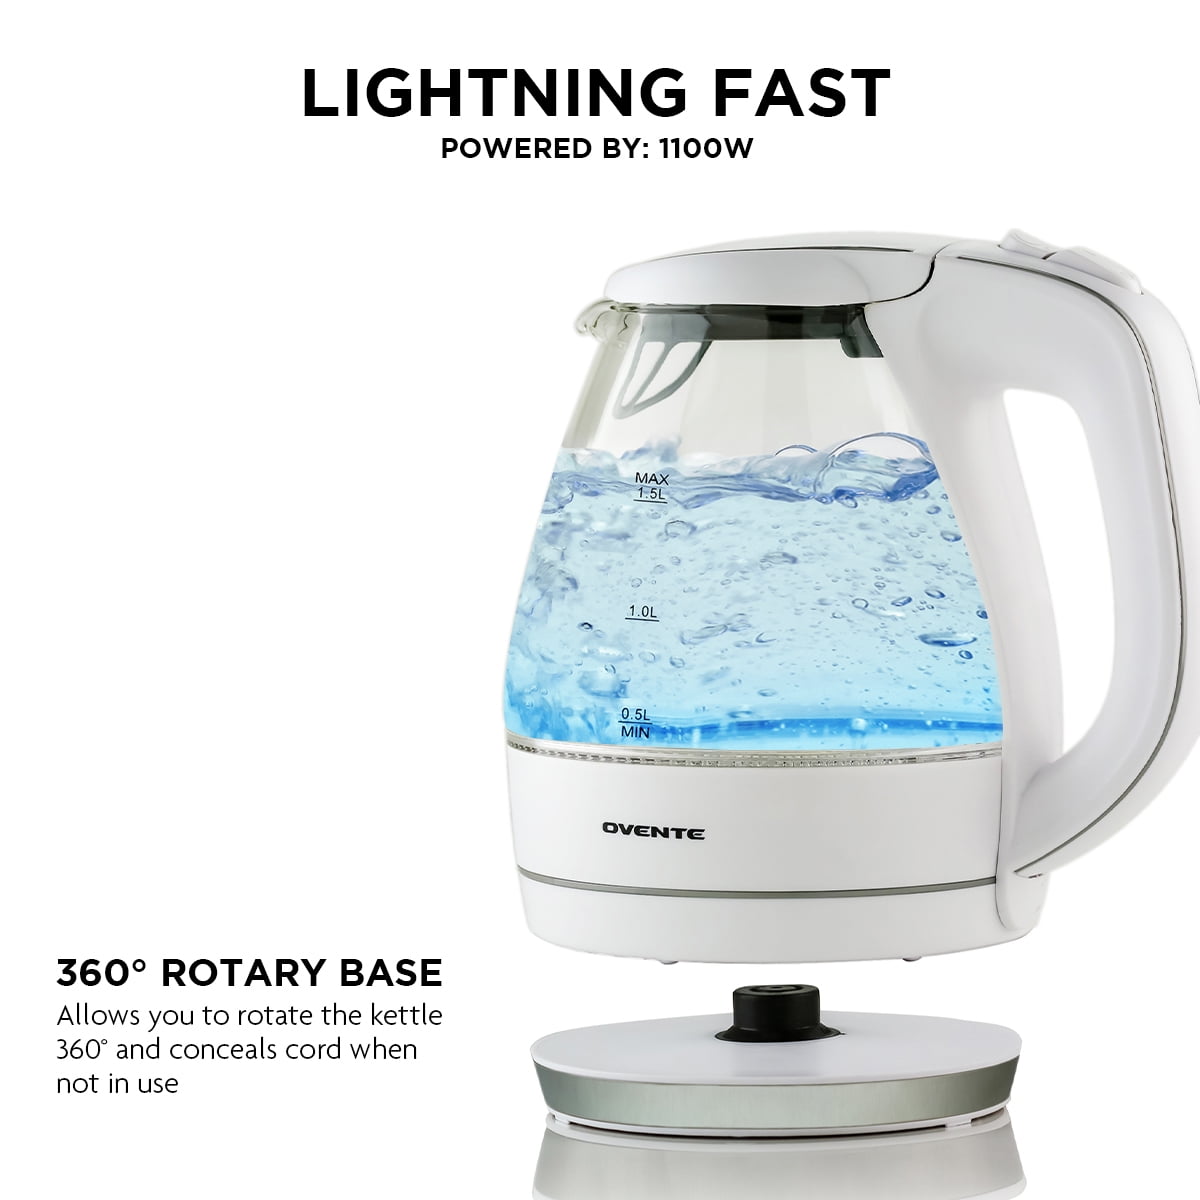 Ovente Portable Electric Glass Kettle 1.5 Liter with Blue LED Light and  Stainless Steel Base, Black KG83B - Bed Bath & Beyond - 8122375